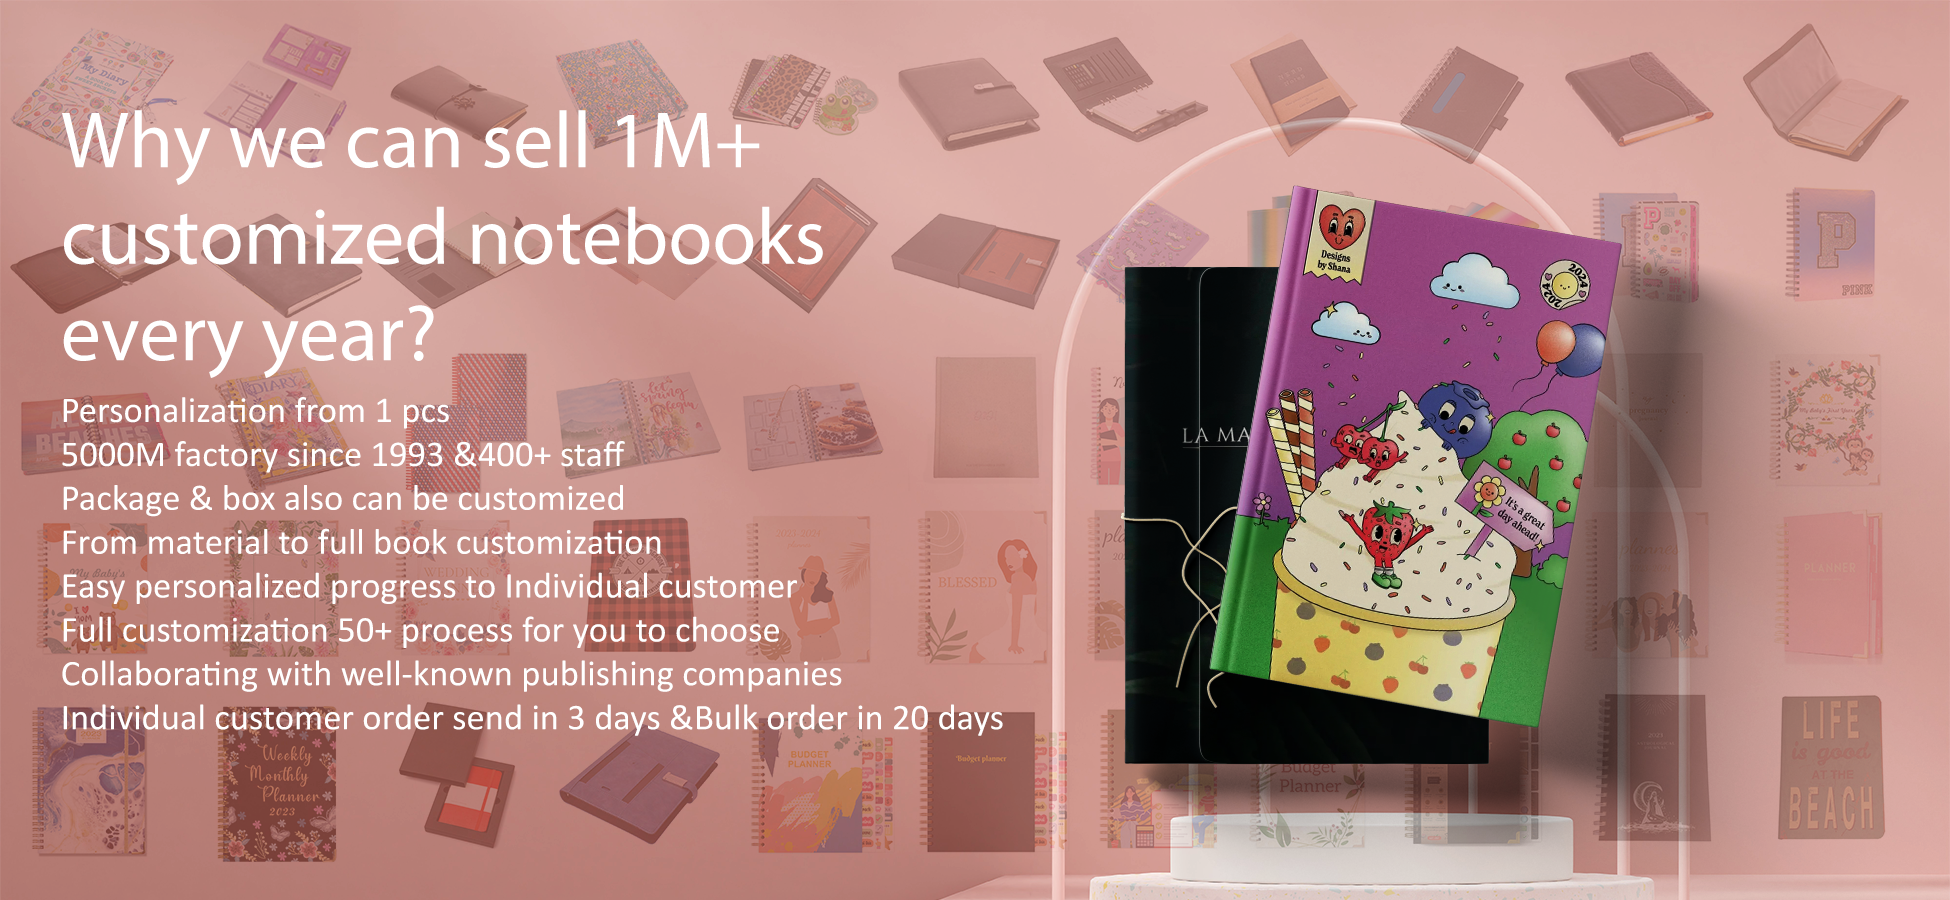 where you can personalize your own logo image photo cover notebook